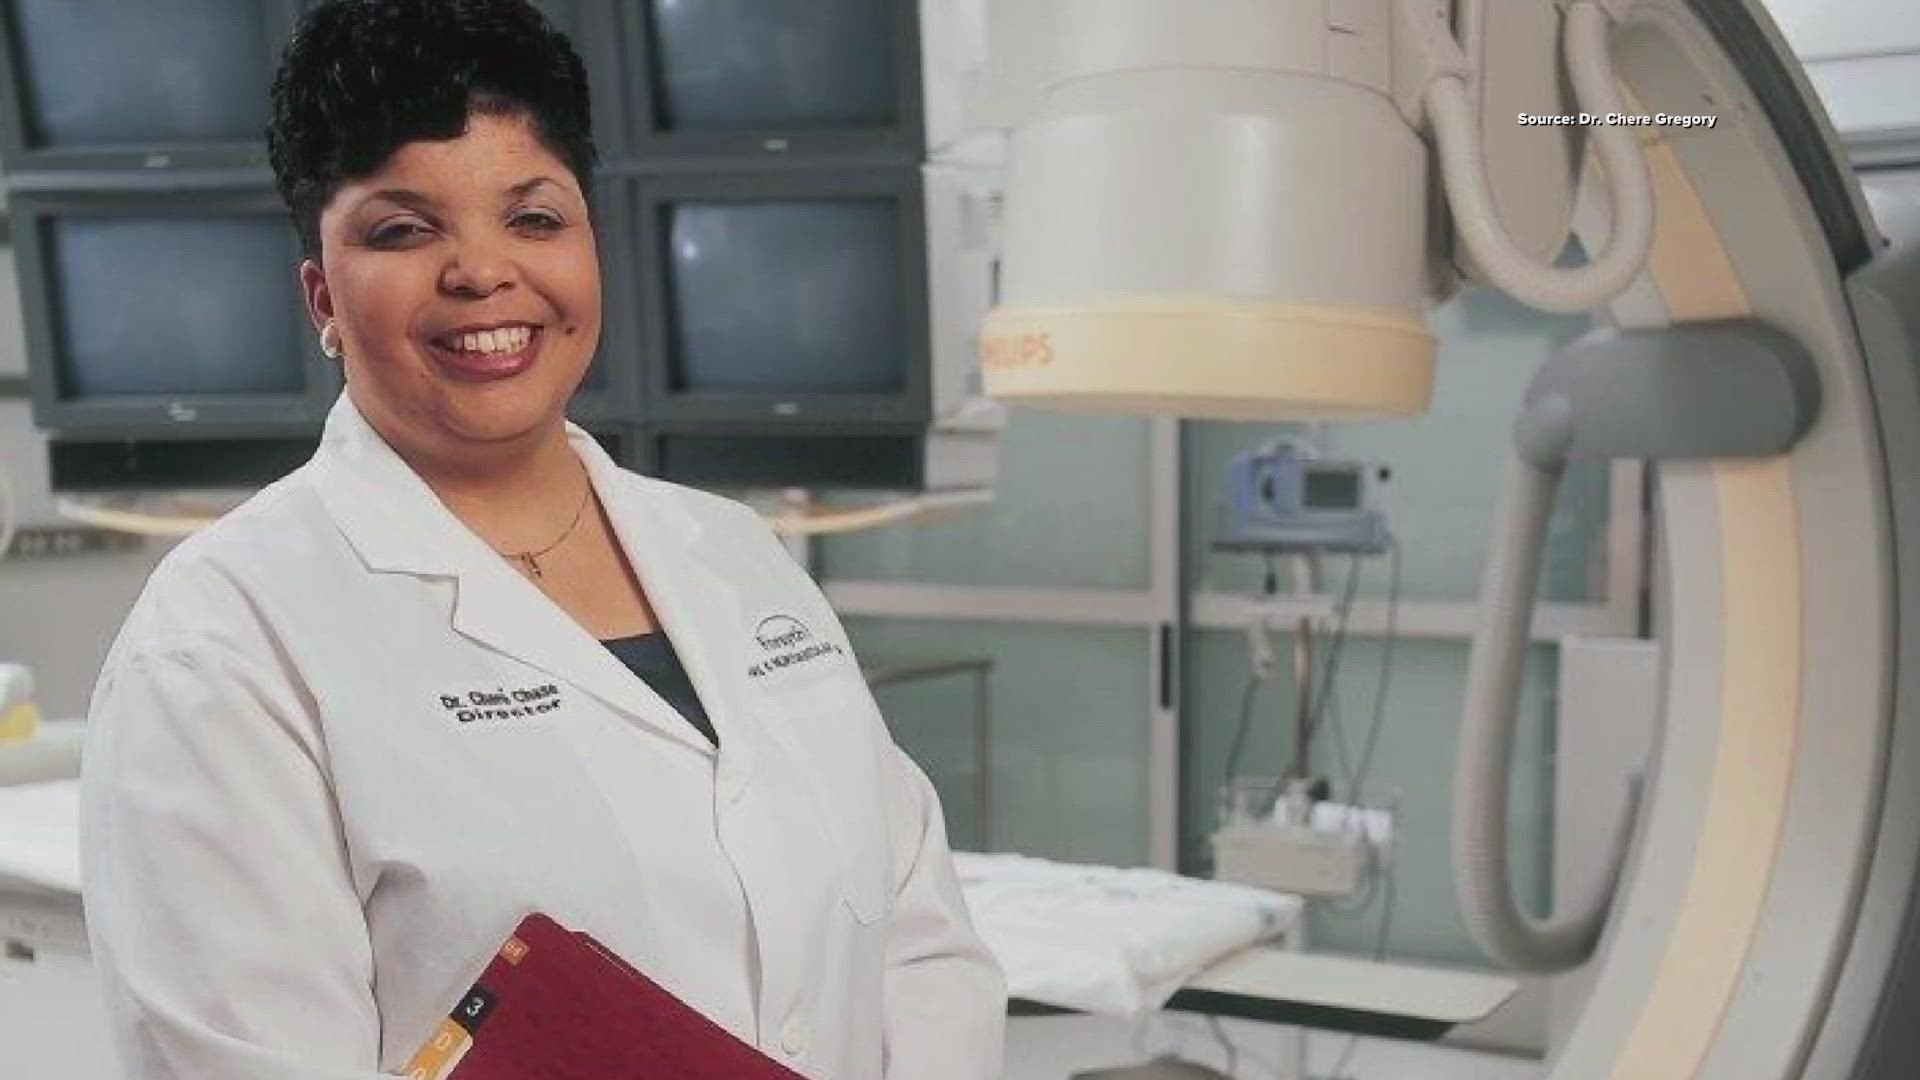 Black History Month spotlight: Dr. Chere Gregory designed and directed a type of critical care unit.